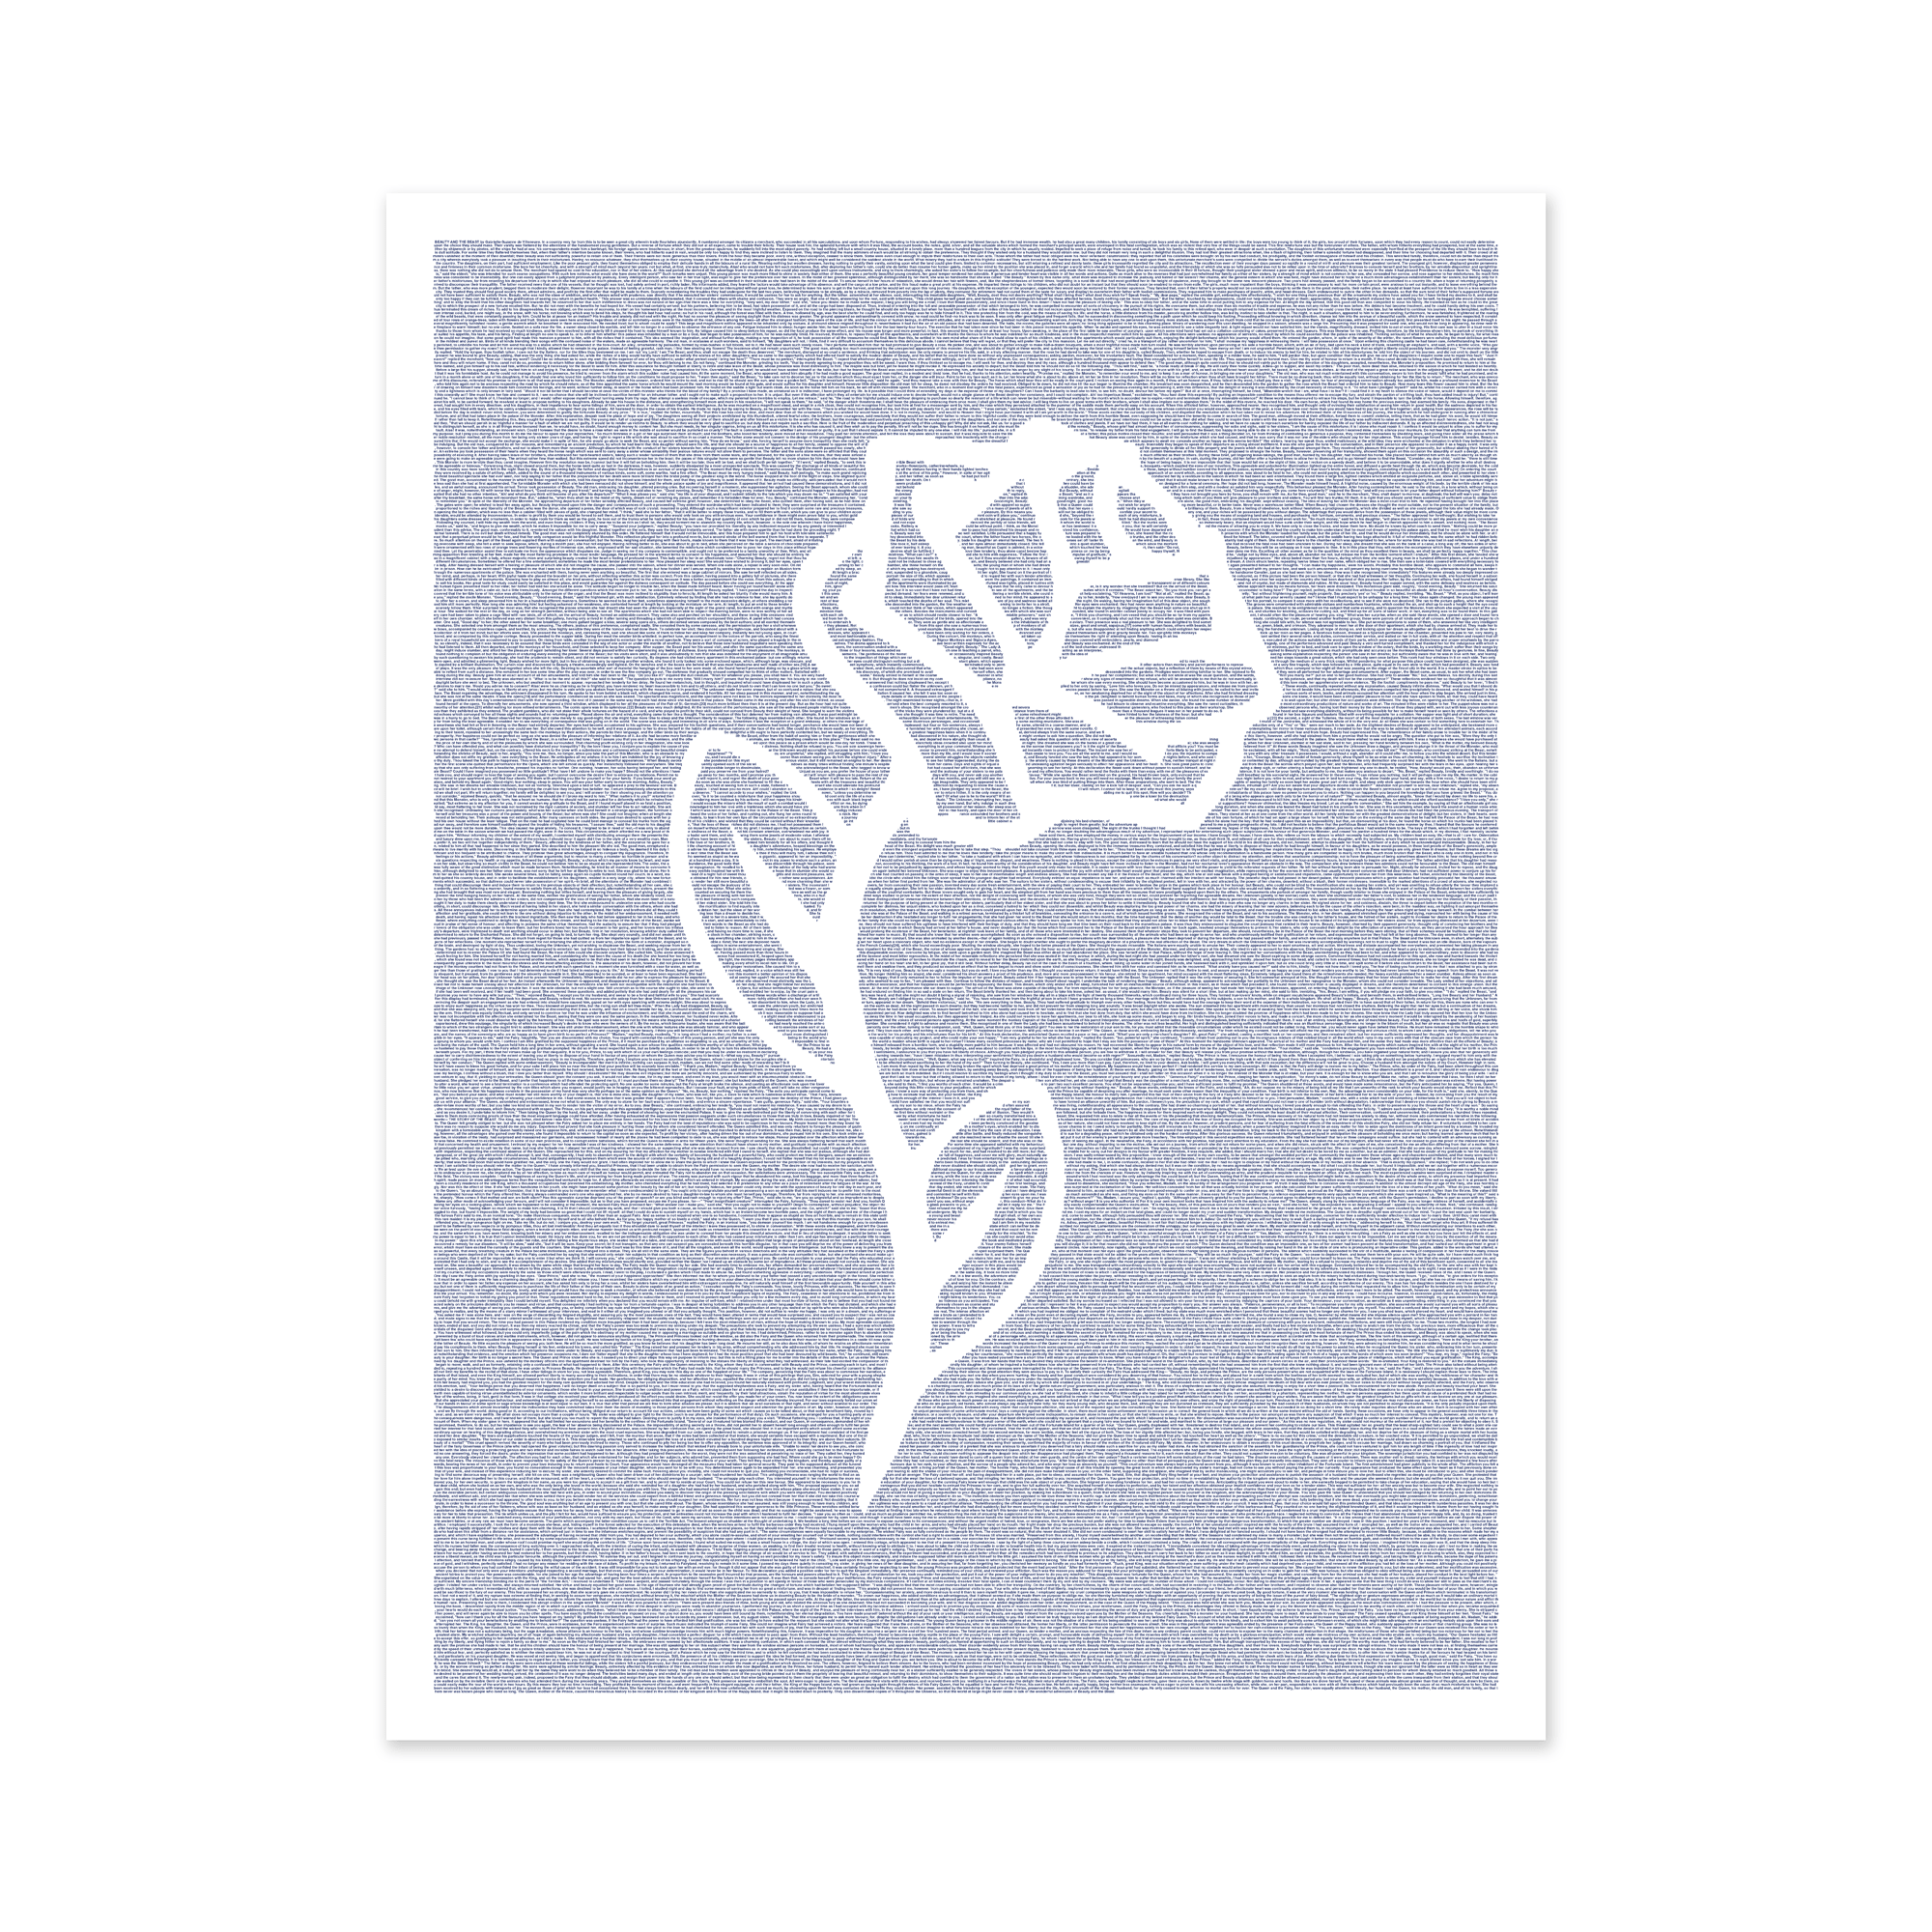 Created from the text of Beauty and the Beast